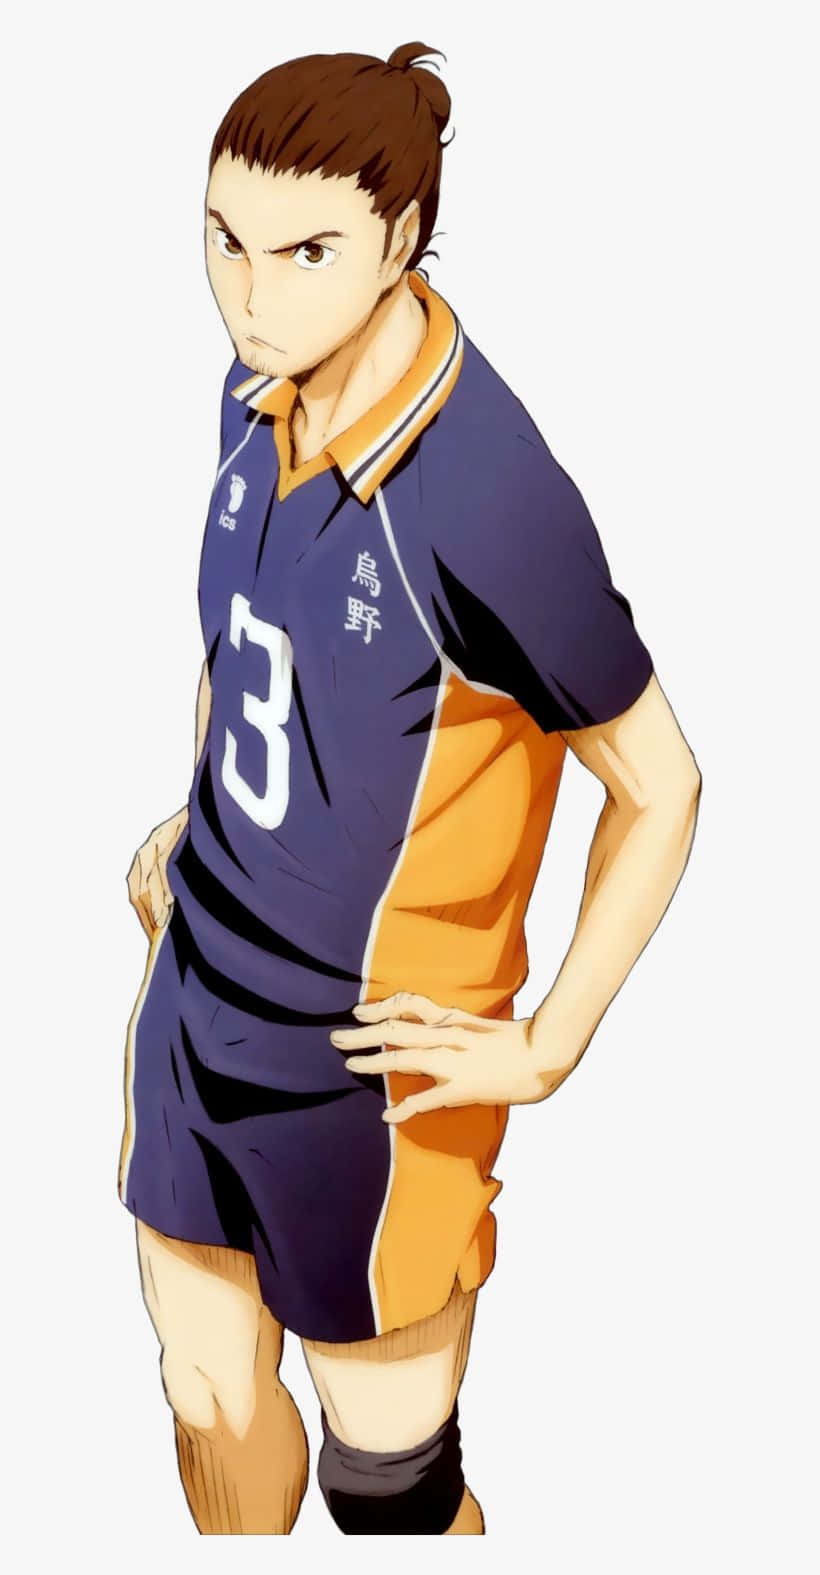 Asahi Azumane in action on the volleyball court. Wallpaper